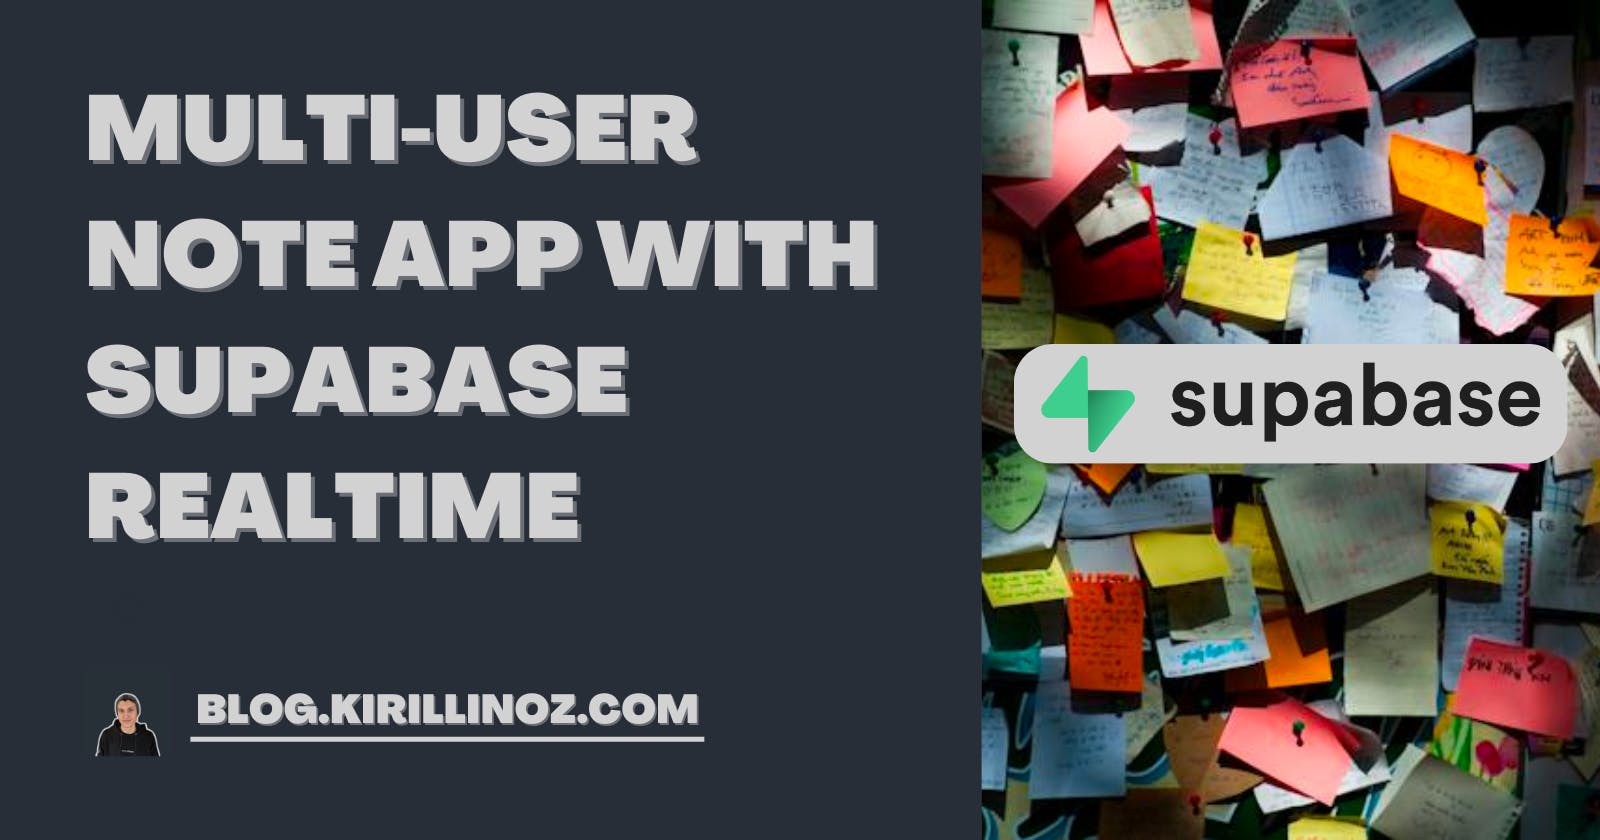 Multi-User Note App with Supabase Realtime